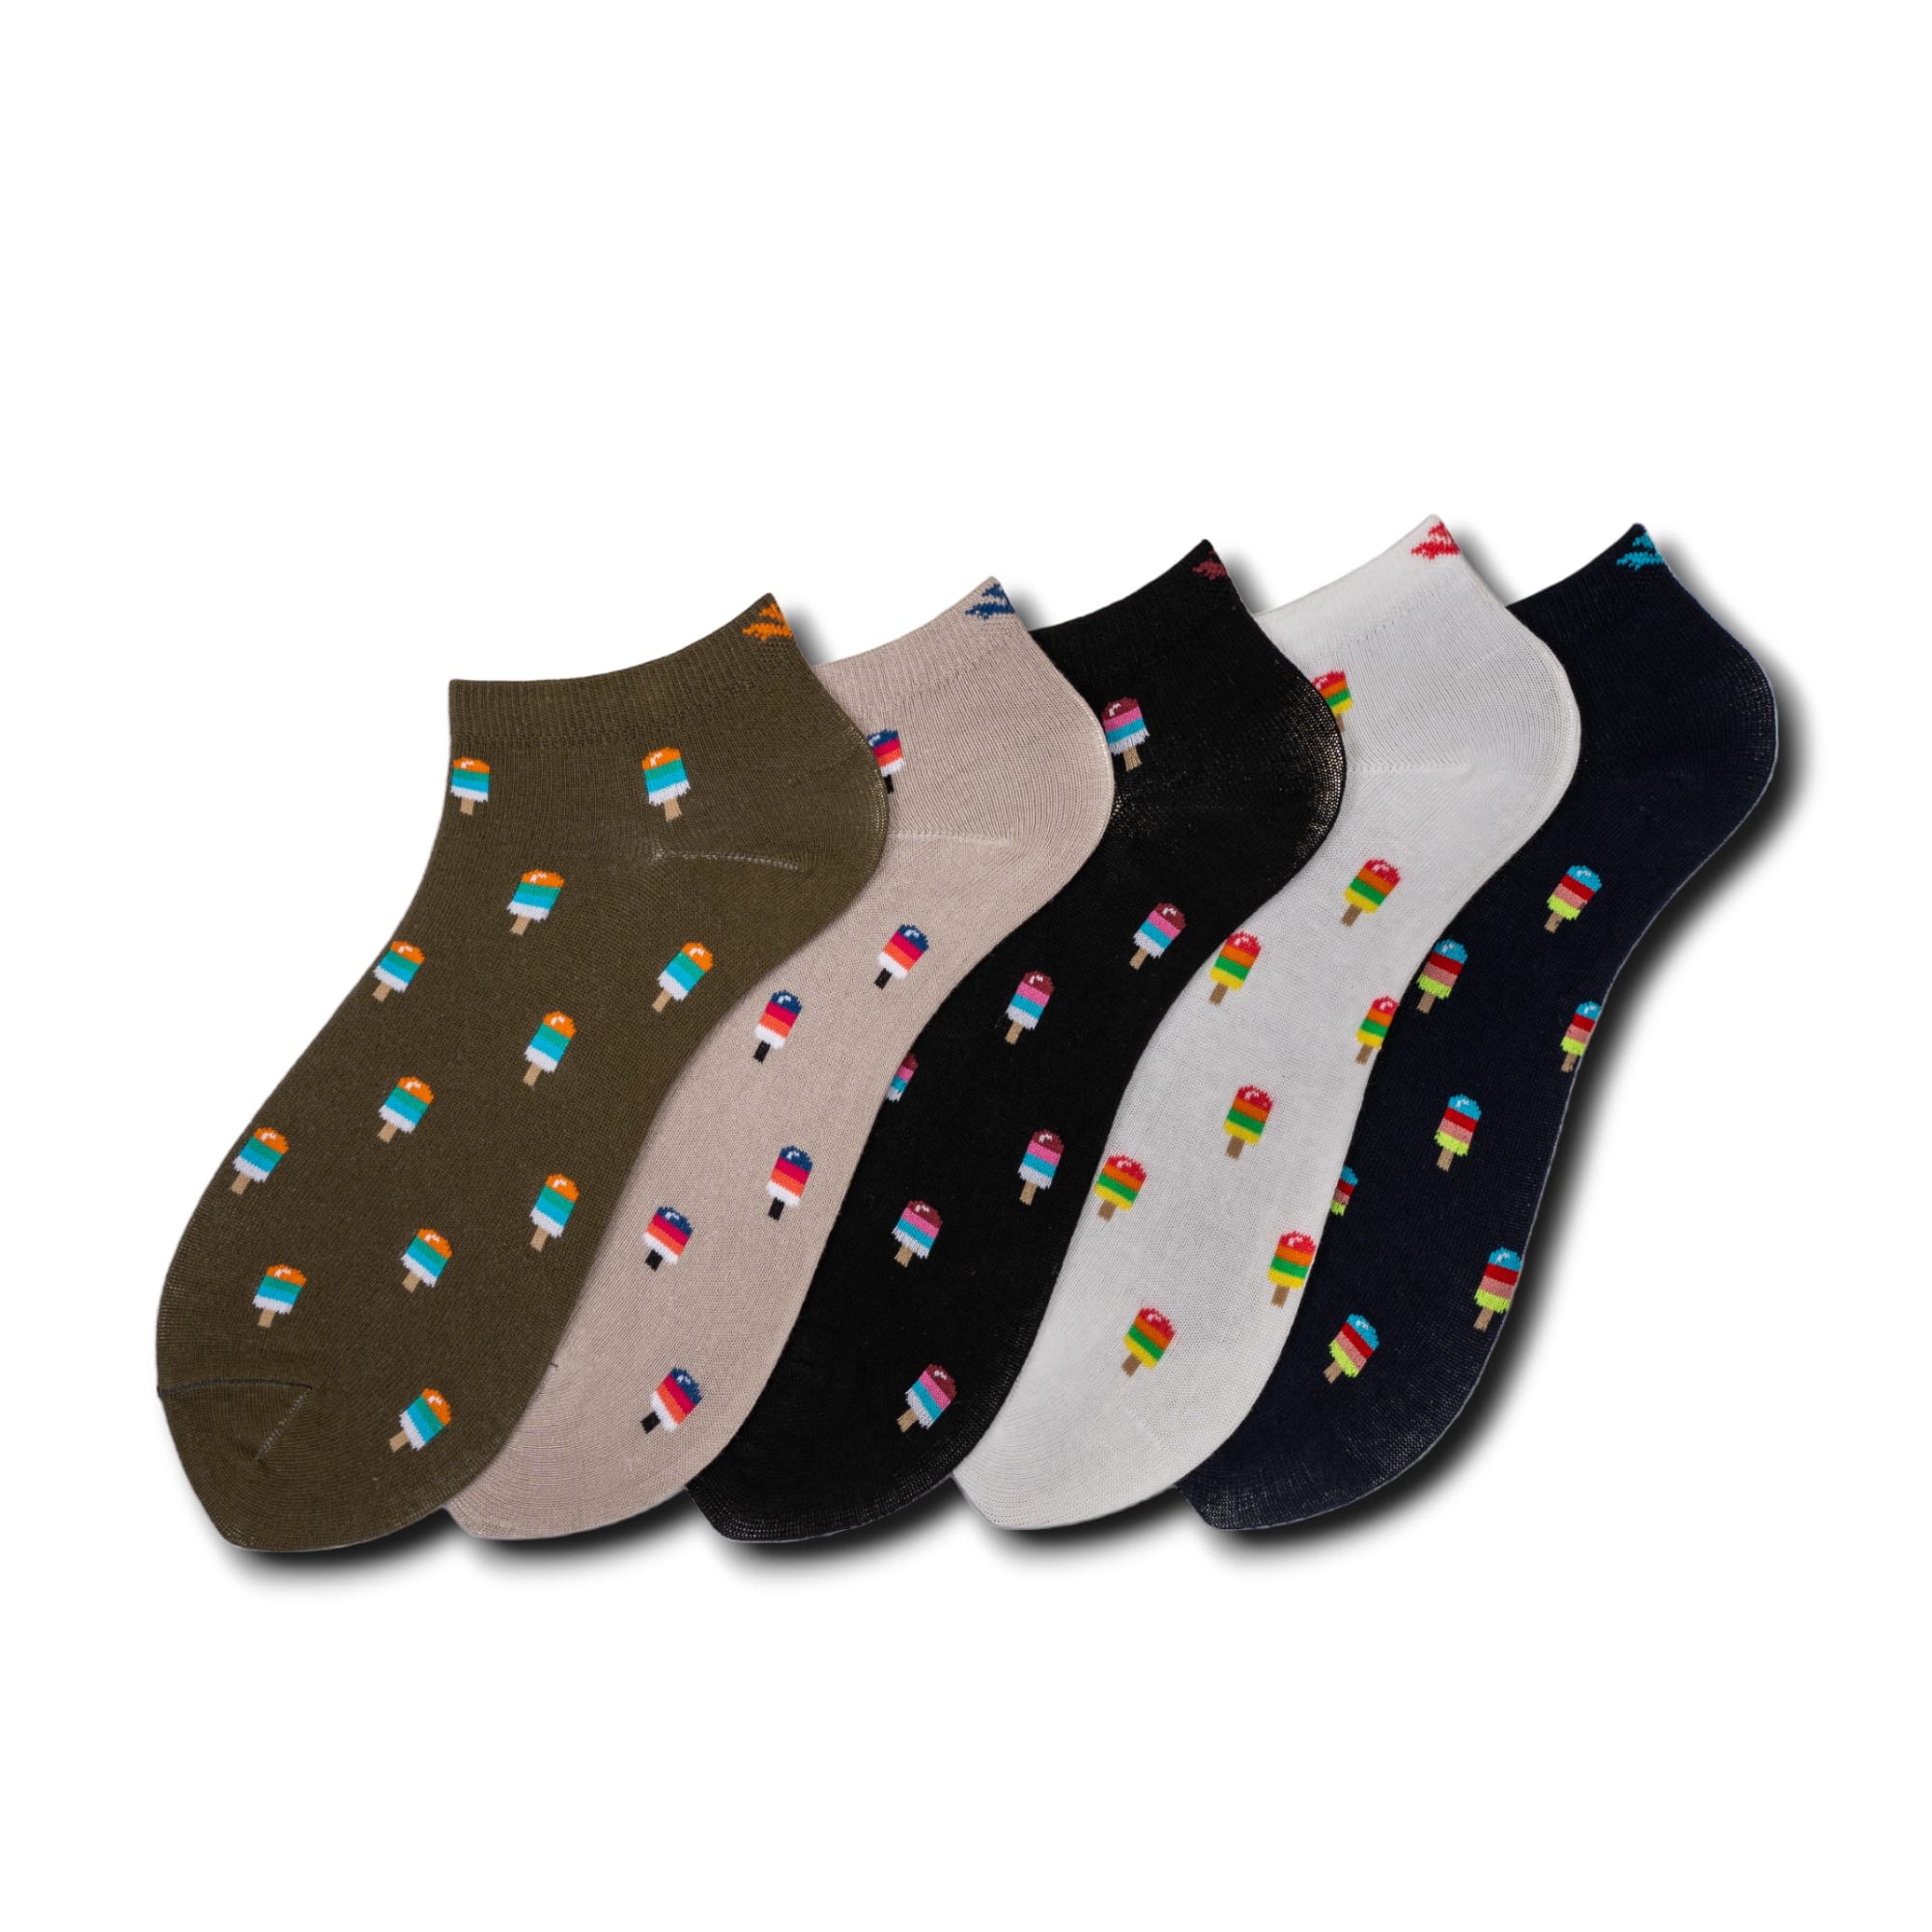 Young Wings Men's Multi Colour Cotton Fabric Design Low Ankle Length Socks - Pack of 5, Style no. M1-LC 0212 N